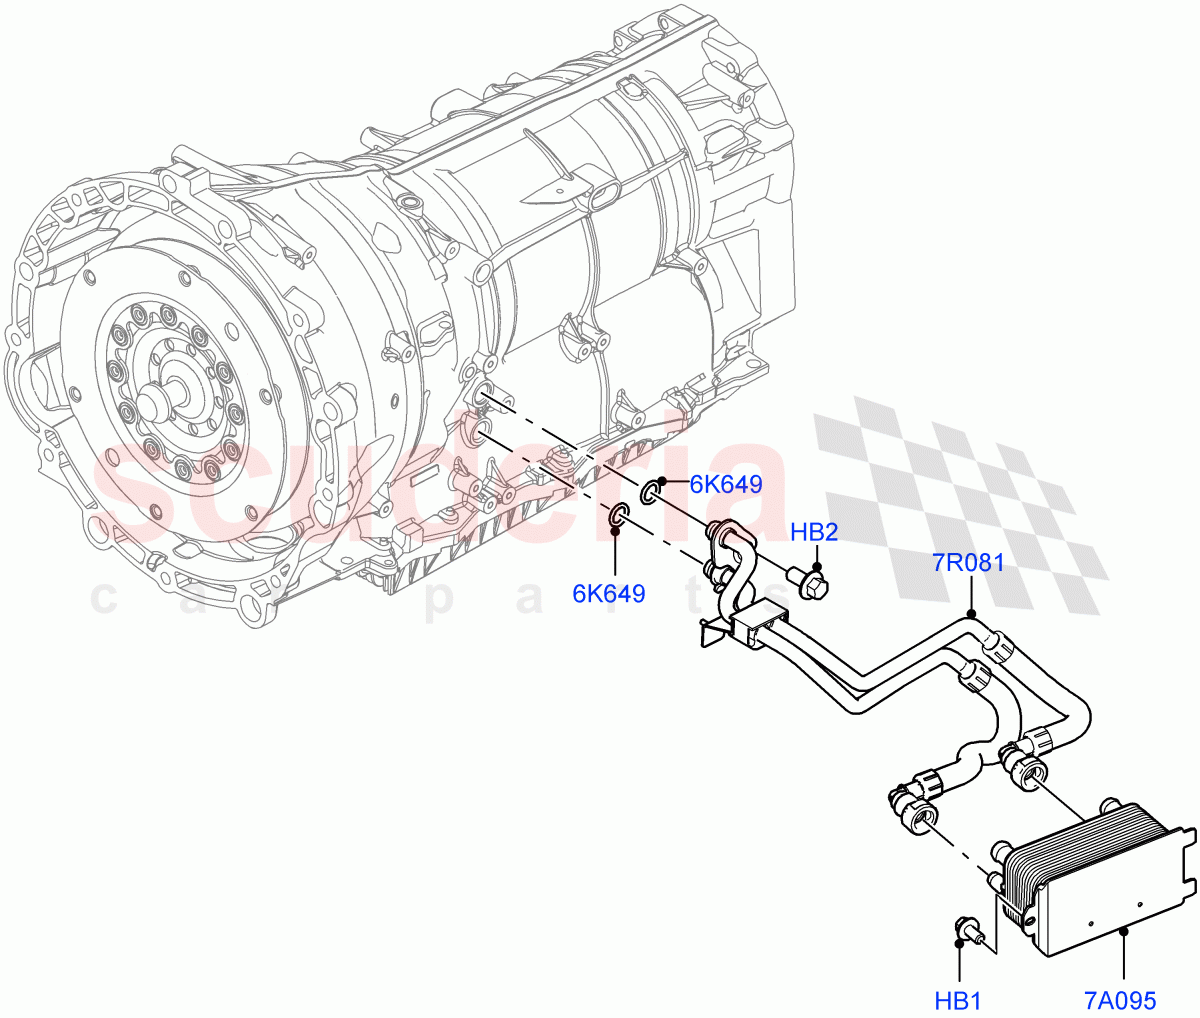 Transmission Cooling Systems(3.0L AJ20P6 Petrol High,8 Speed Auto Trans ZF 8HP76,3.0L AJ20D6 Diesel High)((V)FROMKA000001) of Land Rover Land Rover Range Rover Sport (2014+) [3.0 Diesel 24V DOHC TC]